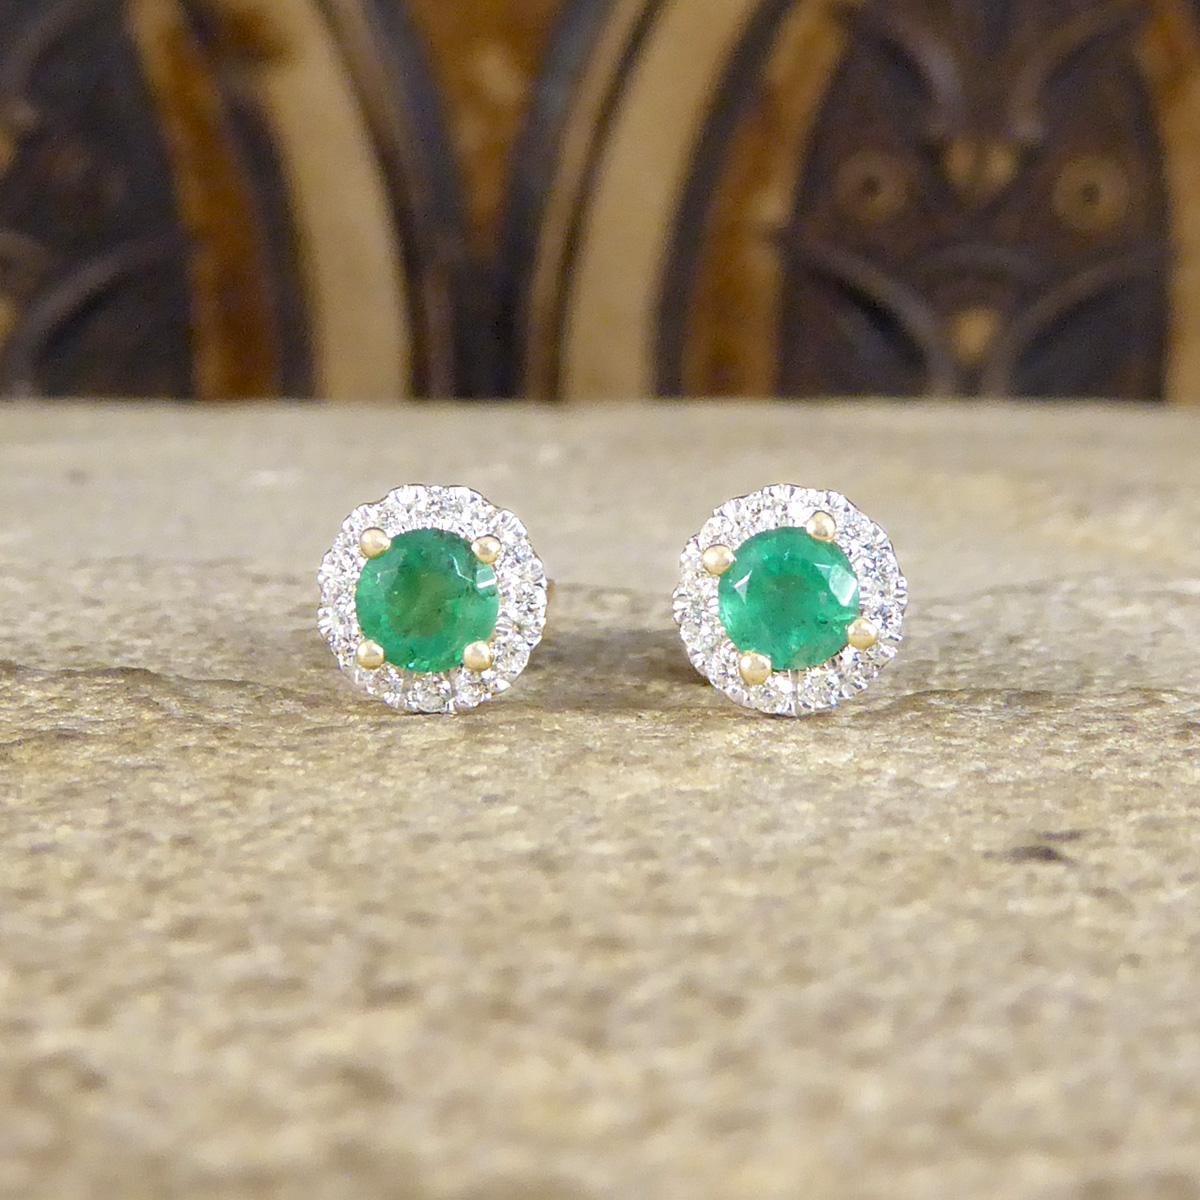 A lovely piece that will stand the test of time and never go out of style. These beautiful Emerald and Diamond stud earrings have been crafted in a target style with an Emerald in the centre surrounded by 12 equally sized Diamonds. Together both